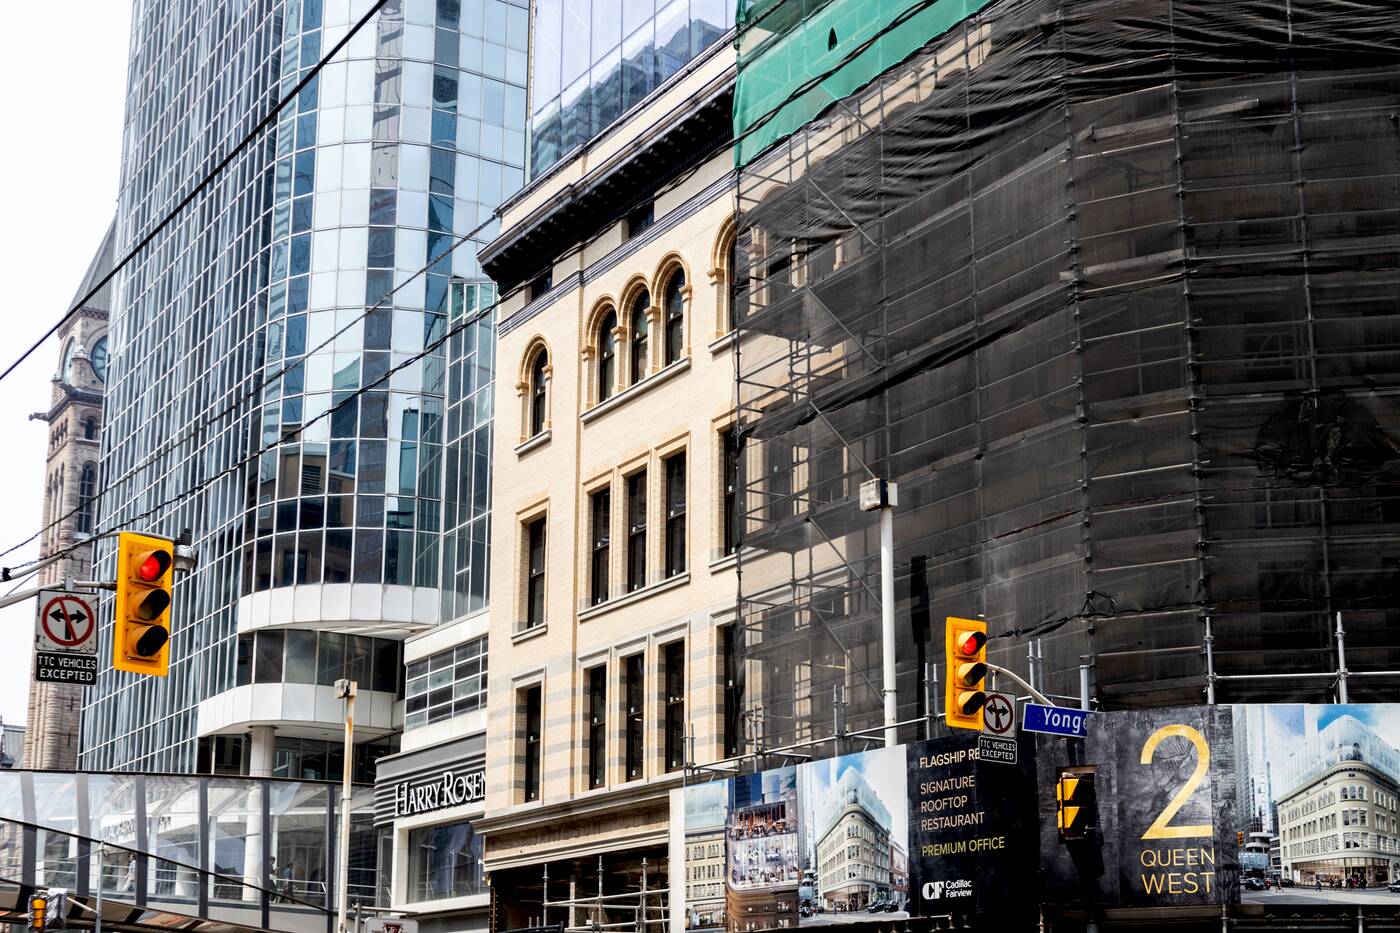 Gorgeous Toronto landmark reappears after five years hidden under